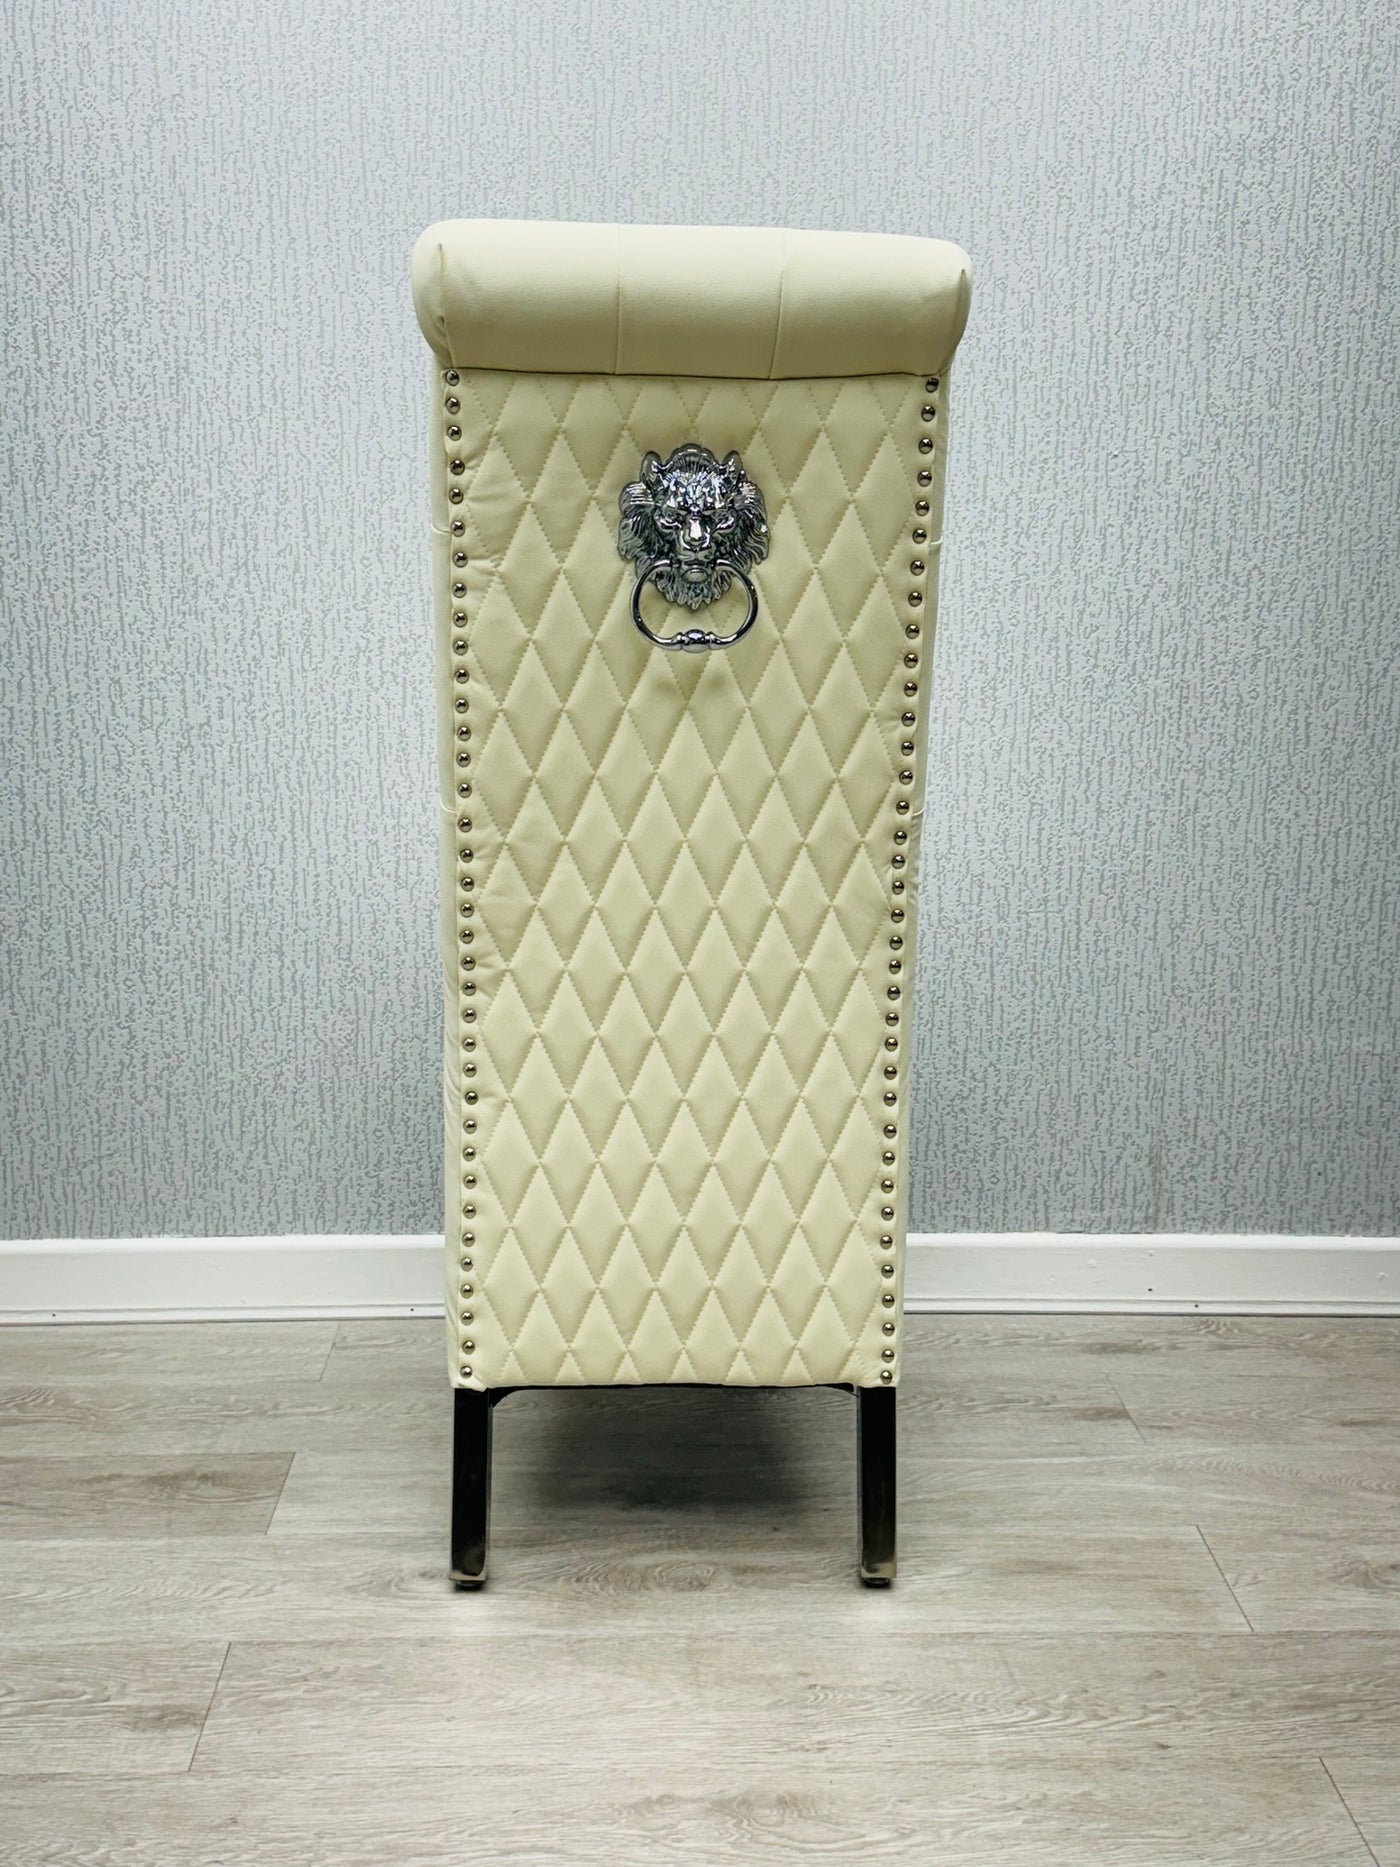 Lucy PU Lion Knocker Quilted Emma Slim Cream White Leather Dining Chair Chrome Legs